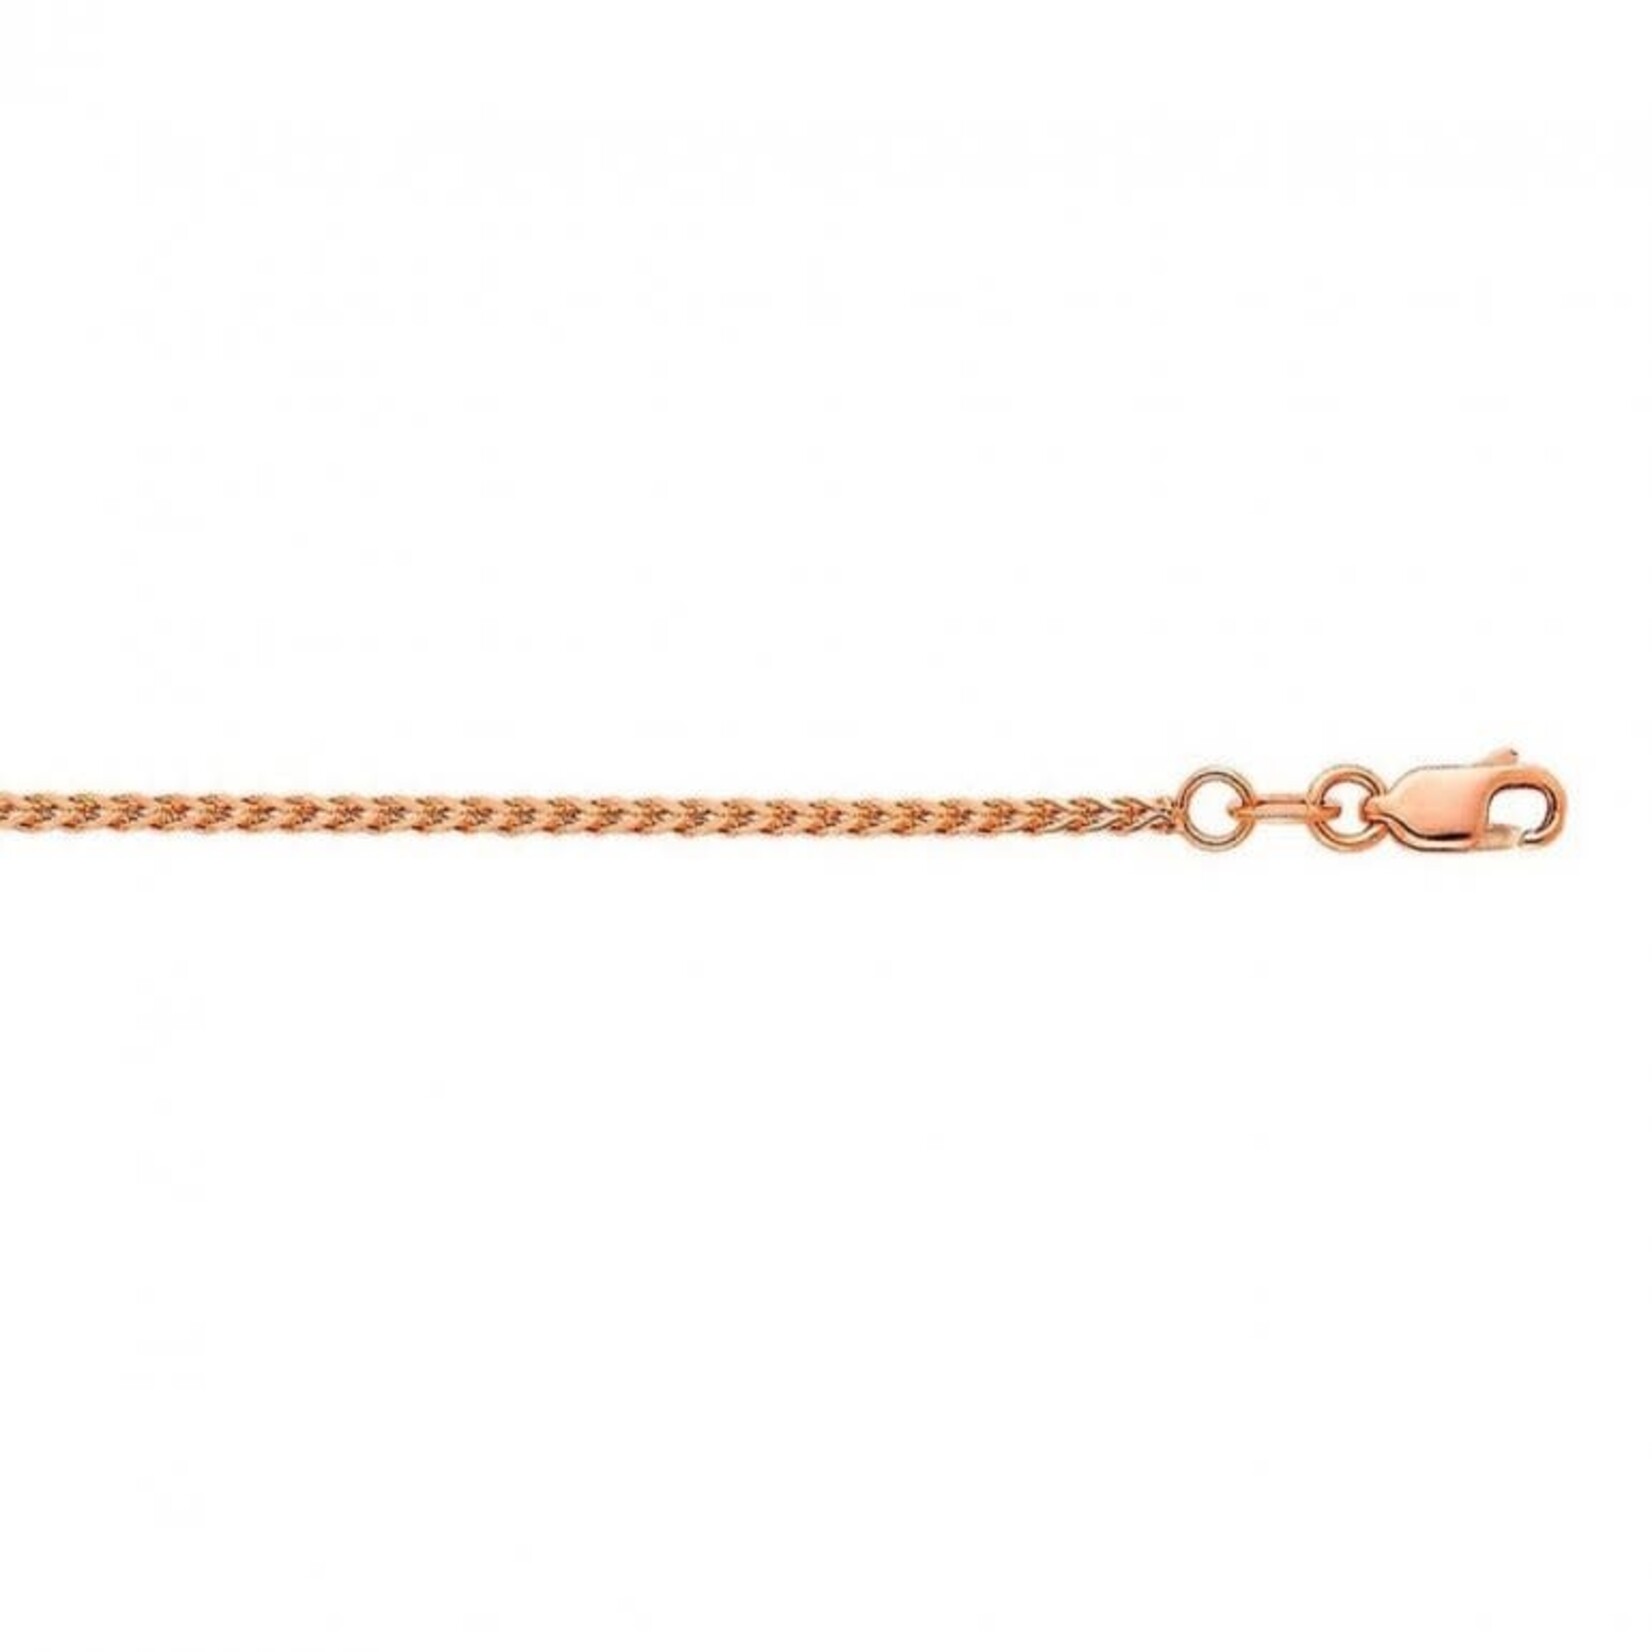 Silver Basic Chain Wheat 02 Rose Gold Plated 1.5mm 18"